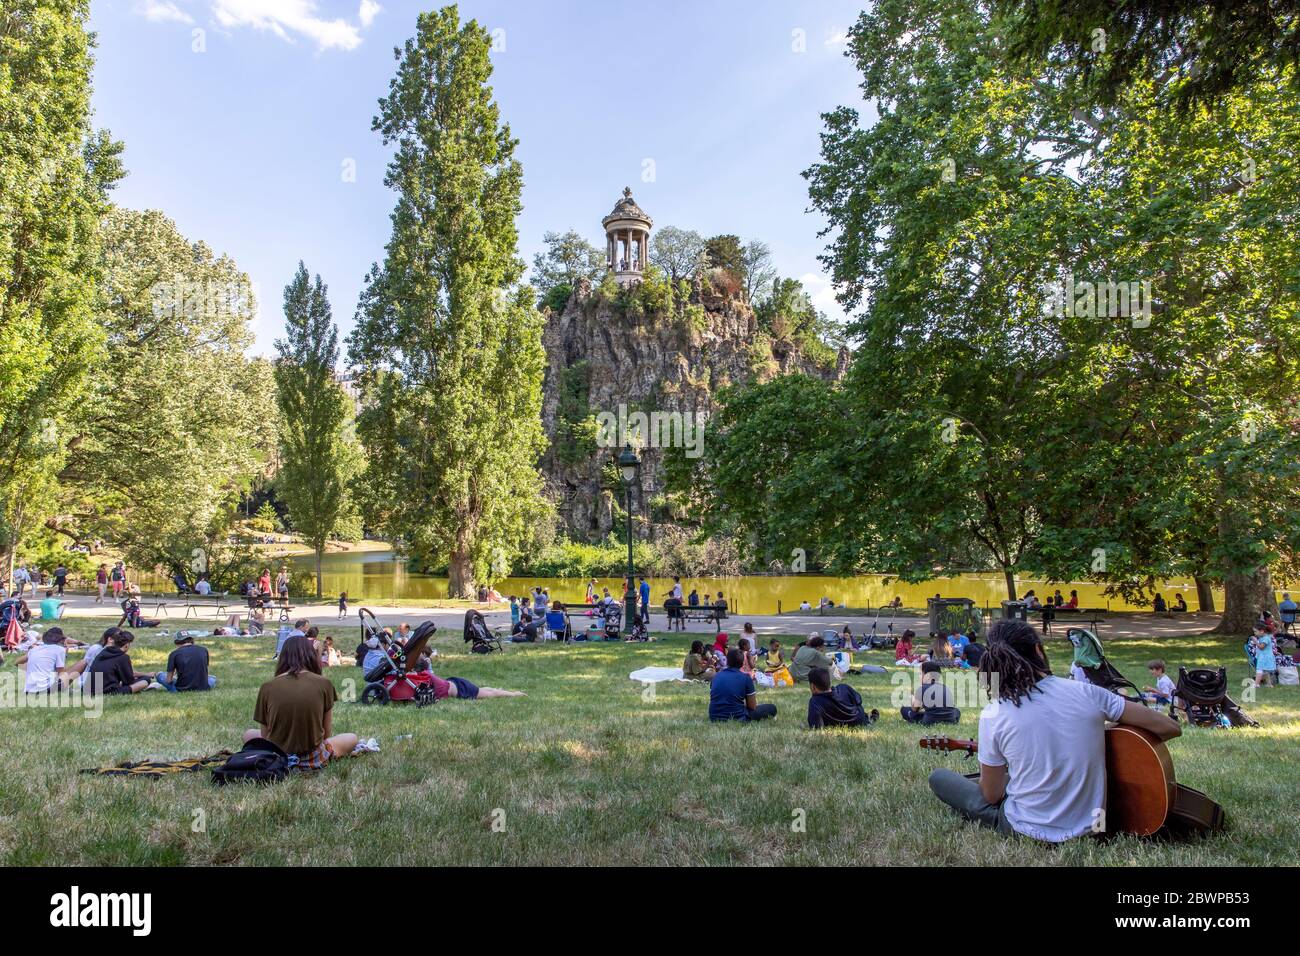 Paris, France - June 2, 2020: Parisians allowed to return to public parks after the end of lockdown due to covid-19 Stock Photo